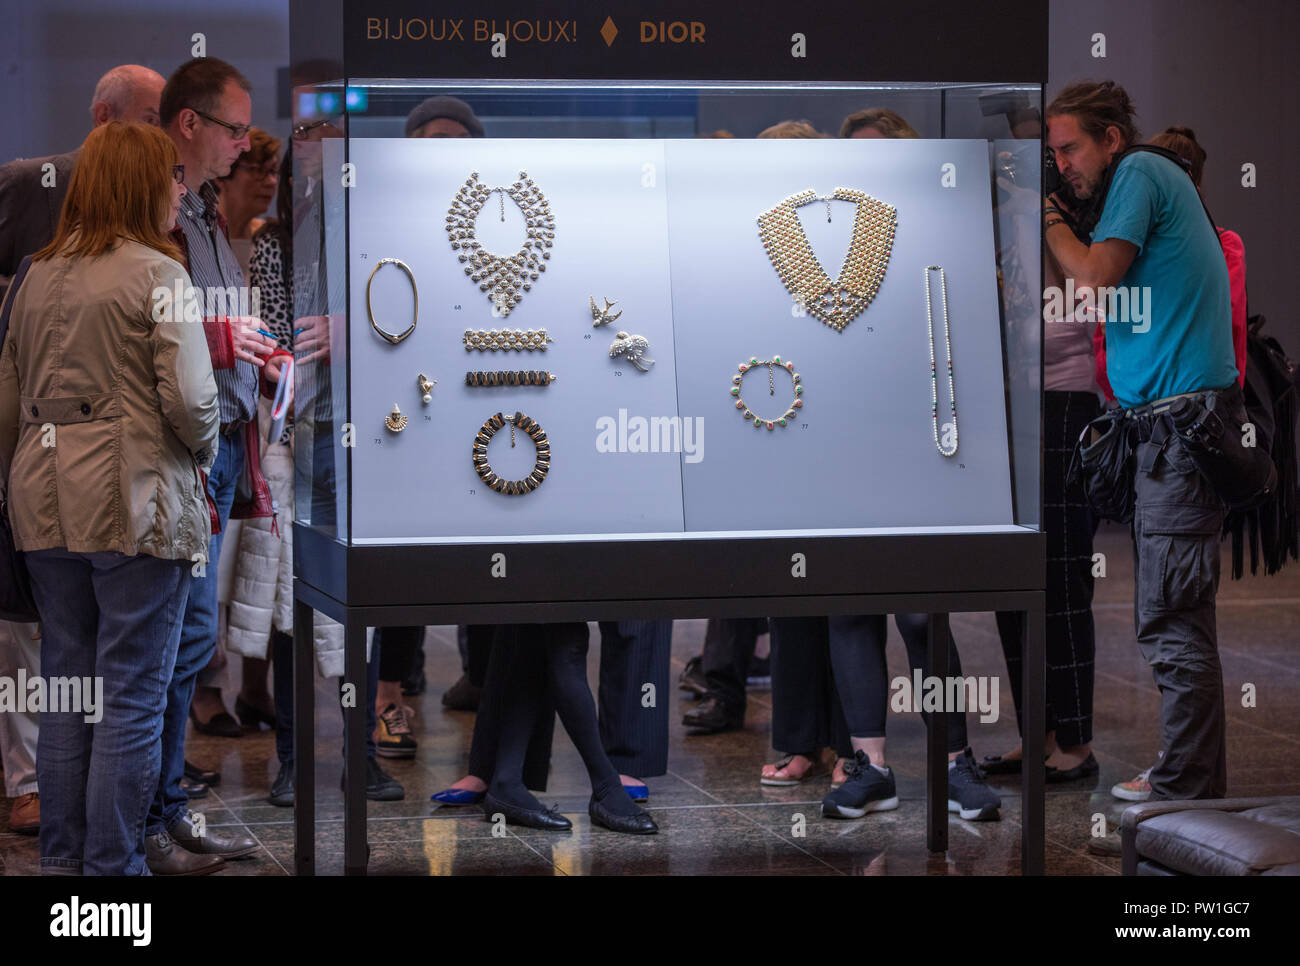 12 October 2018, Berlin: Visitors standing in front of a display